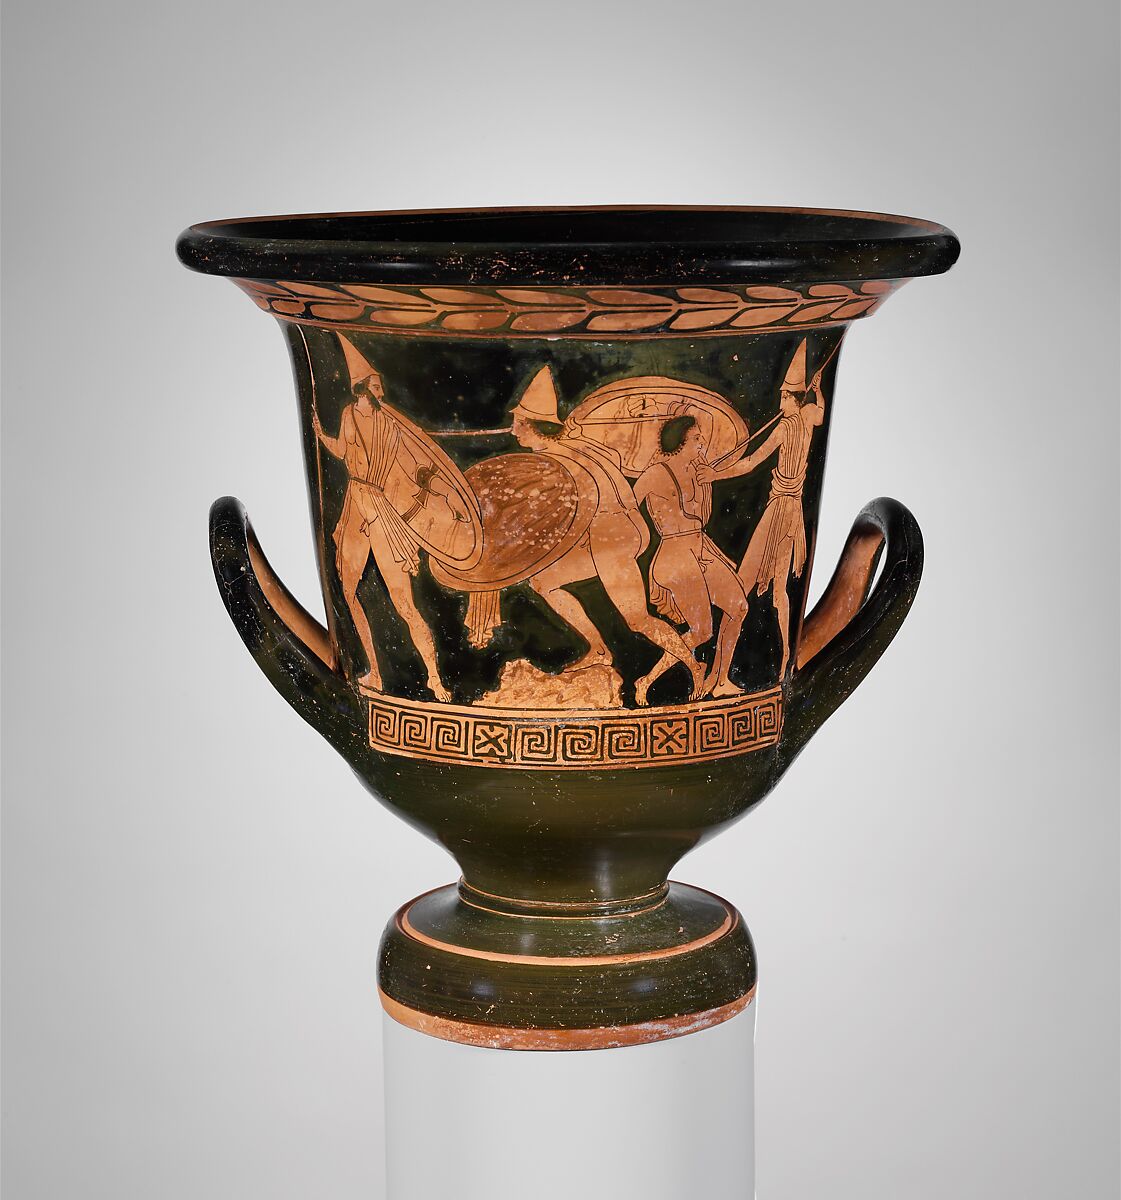 Terracotta calyx-krater (mixing bowl), Attributed to the Amykos Painter, Terracotta, Greek, South Italian, Lucanian 